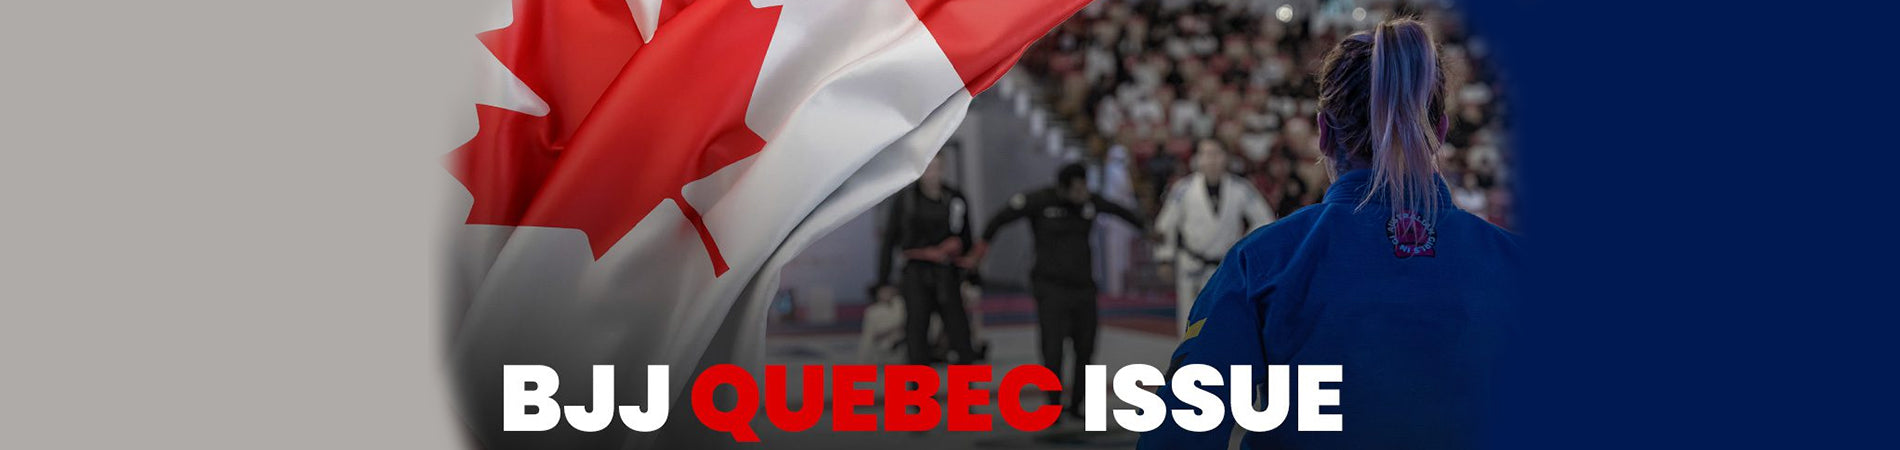 The Jiu-Jitsu Quebec issue: Why Is BJJ Illegal in Canada?